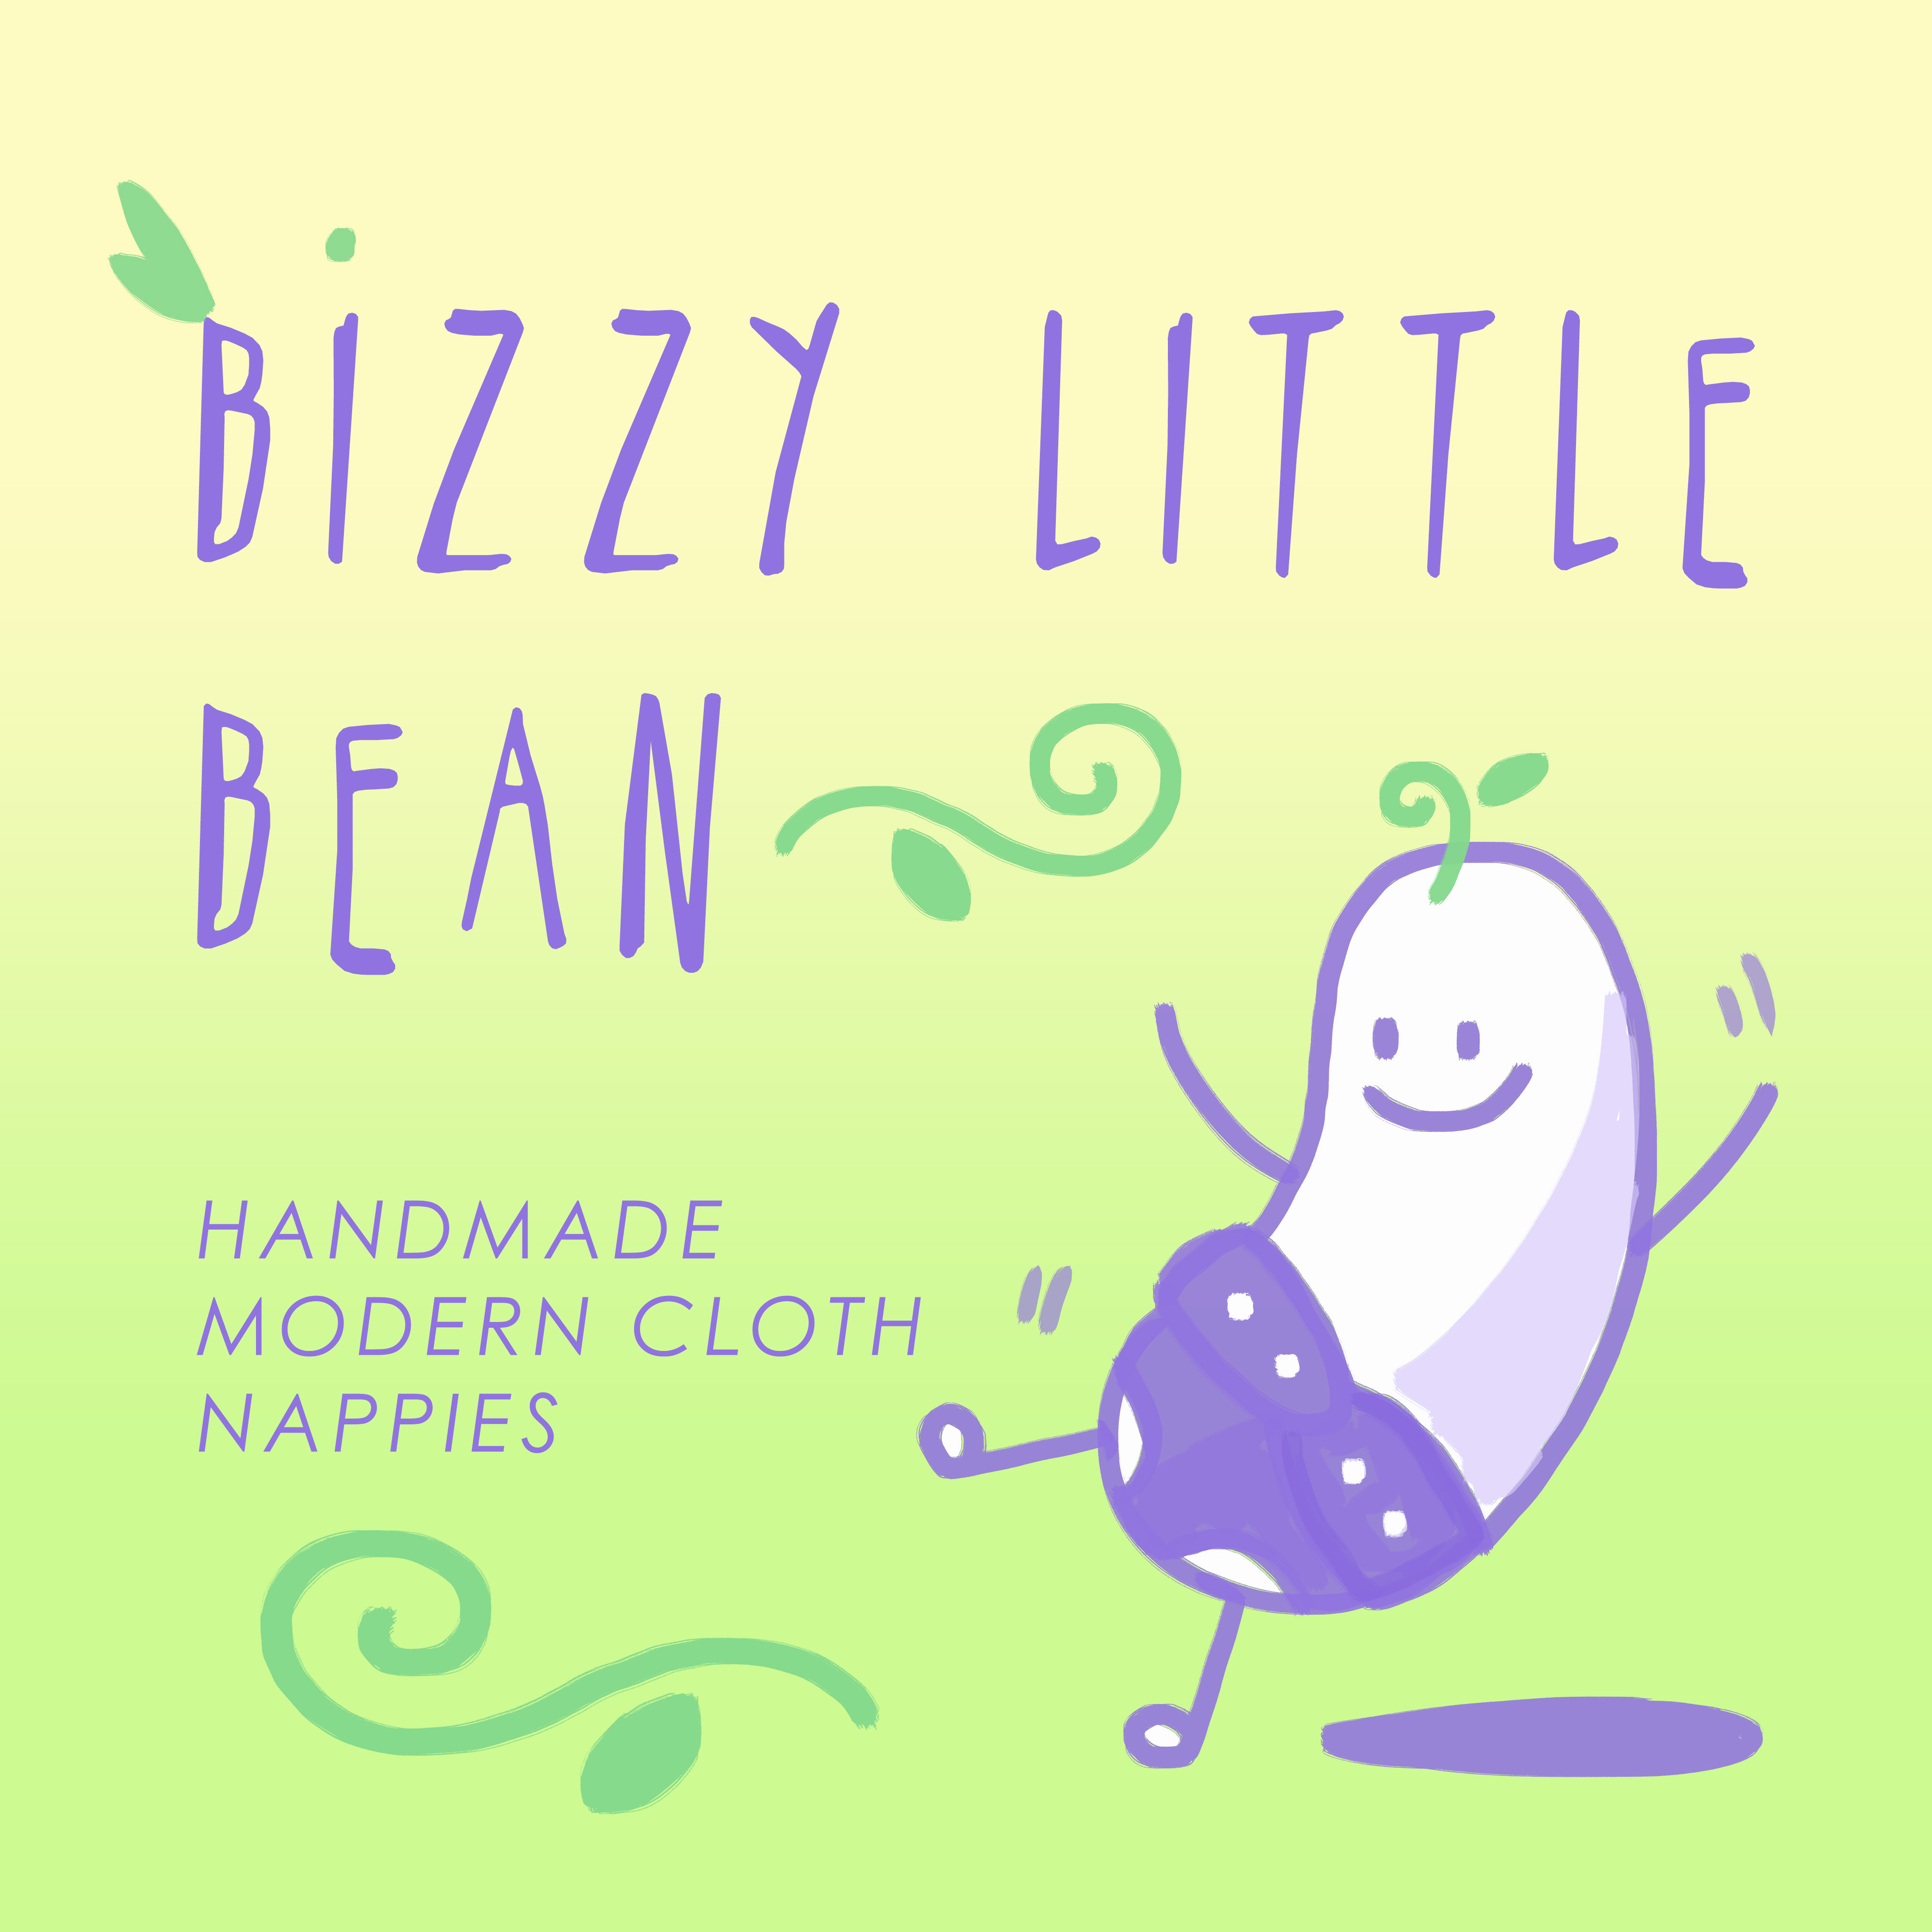 https://thehandcraftednappyconnection.com.au/images/bizzylittlebean%20handmade%20profile%20pic.jpg